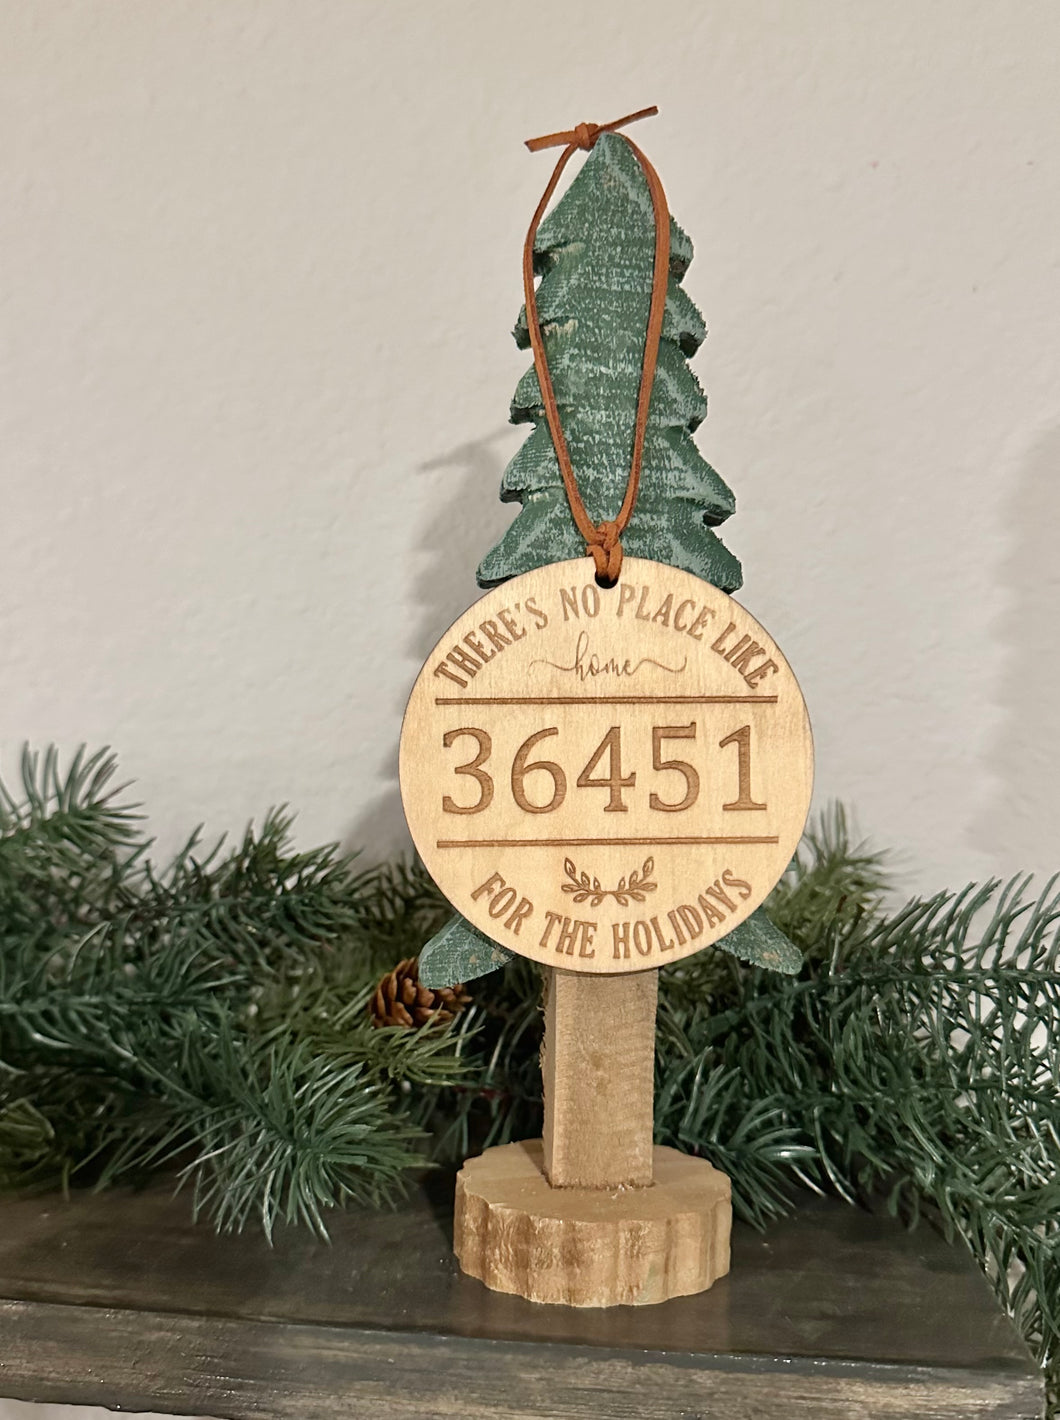 There’s No Place Like Home For The Holidays Ornament